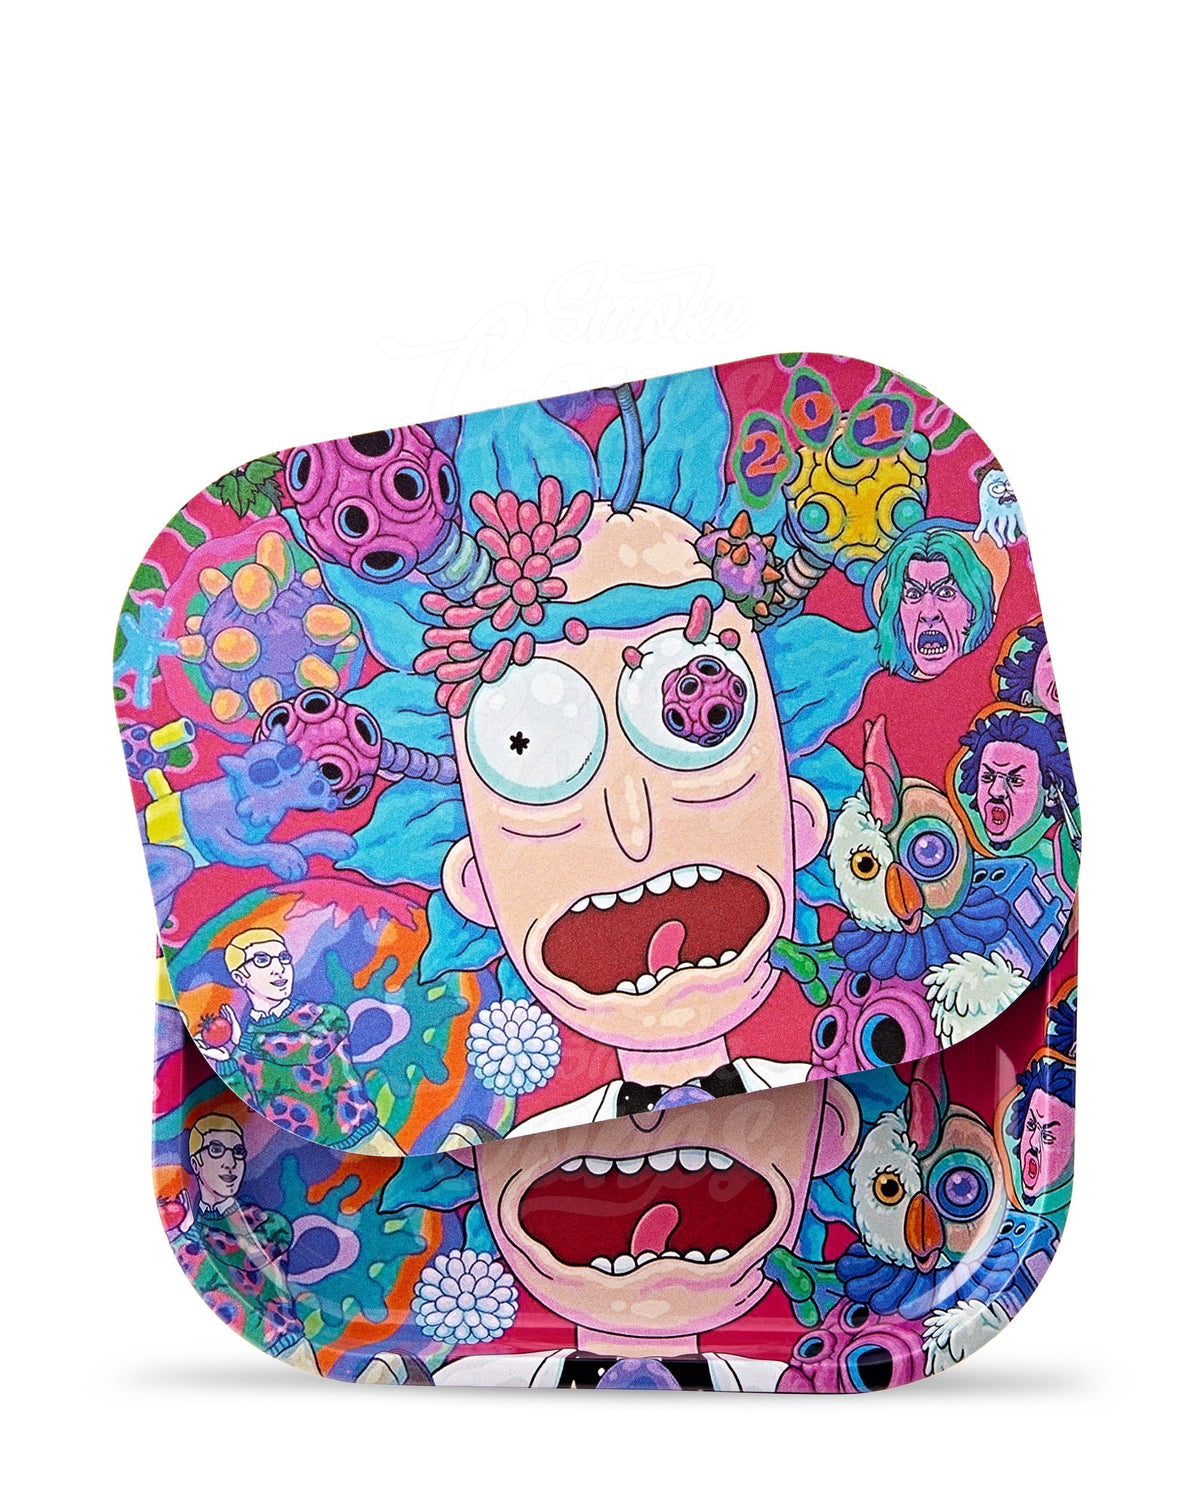 R&M Trippy Mini Rolling Tray w/ Magnetic Cover - 1